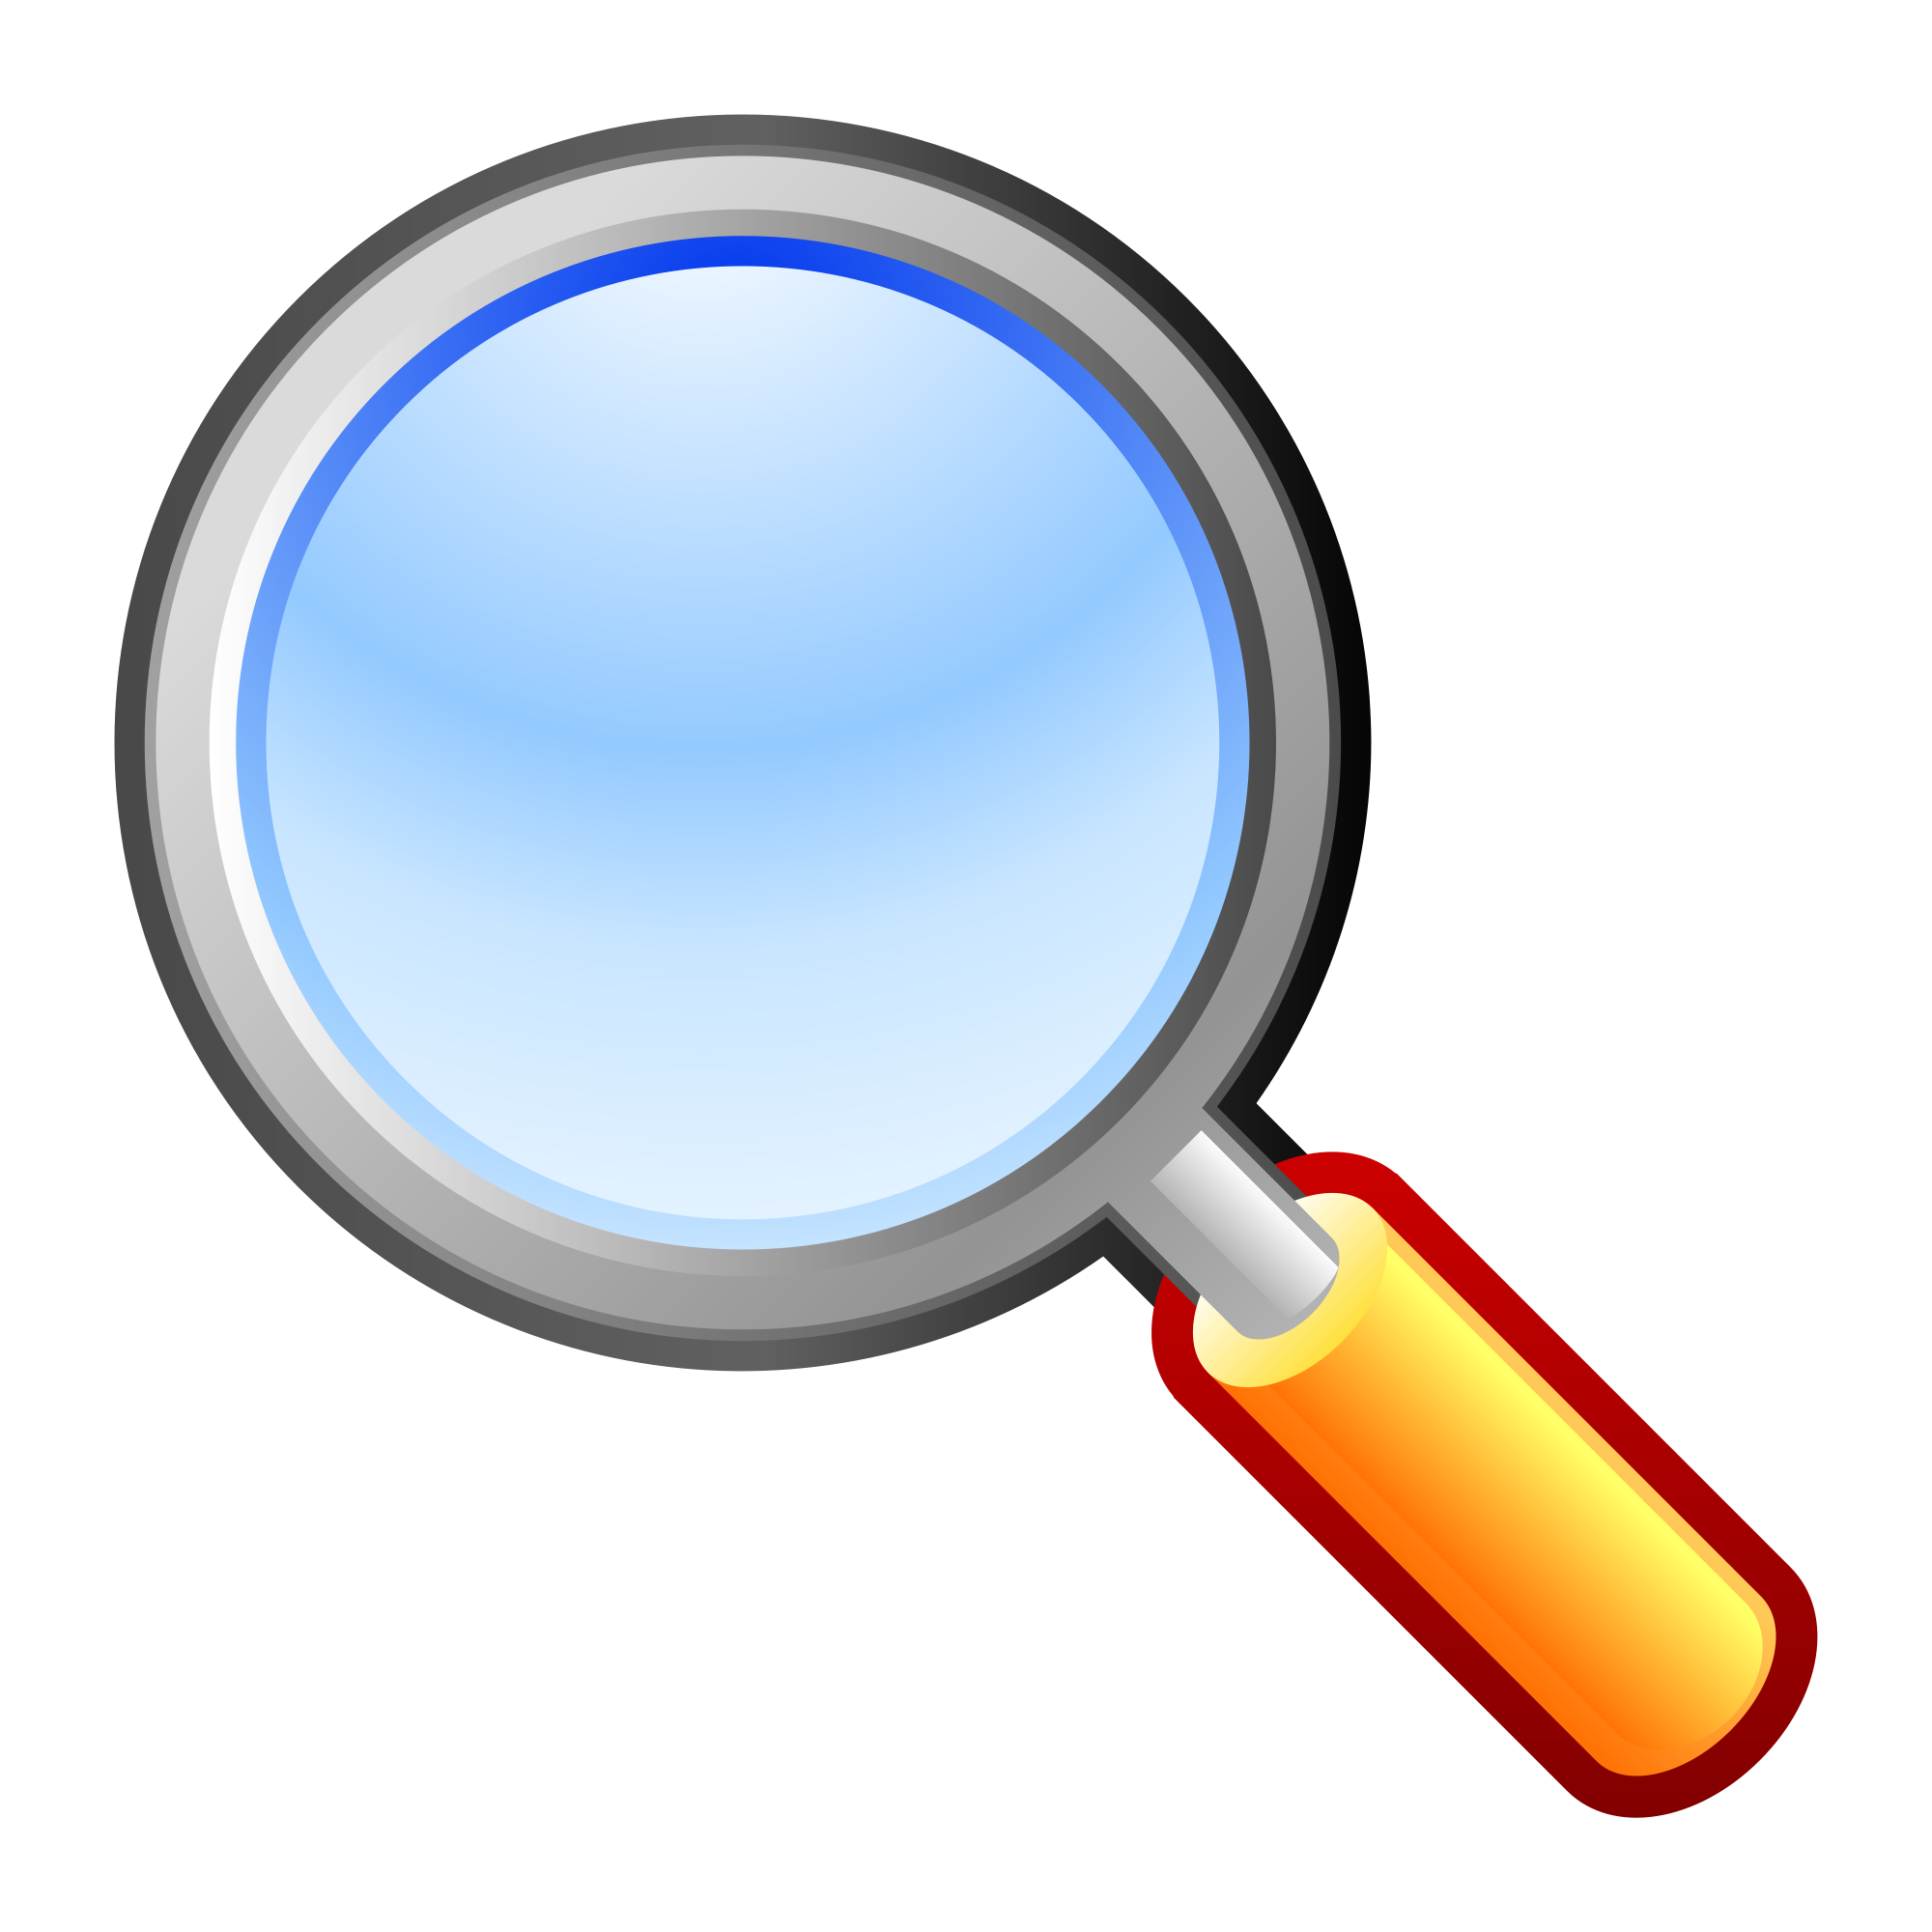 Magnifying glass clip art magnifying glass vector image image 2